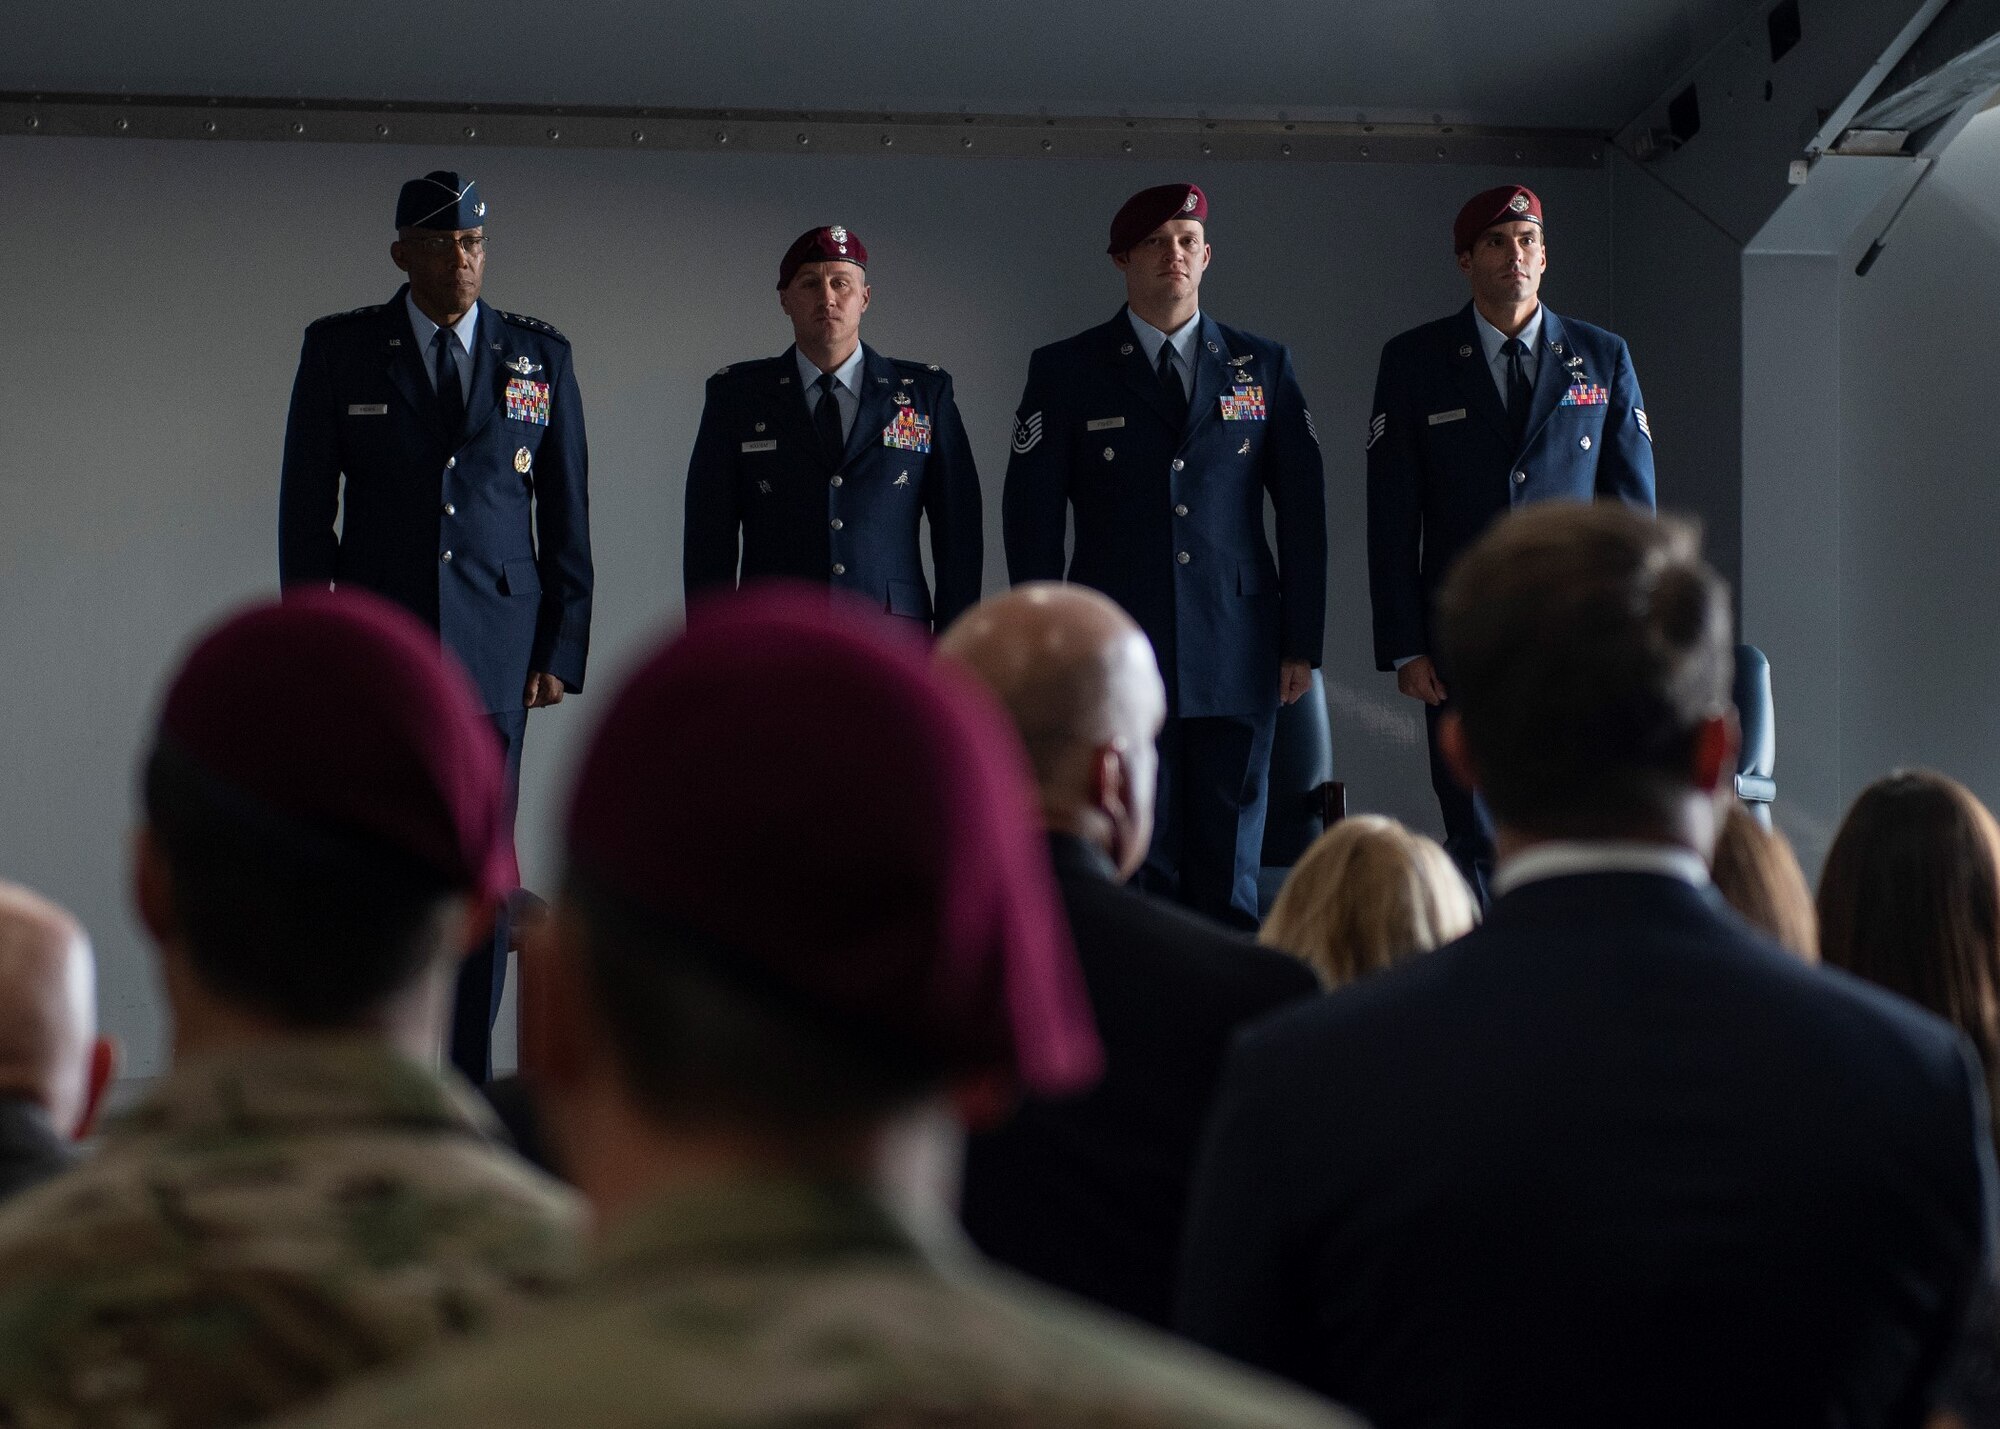 Four Airmen stand at attention in front of a crowd of people.